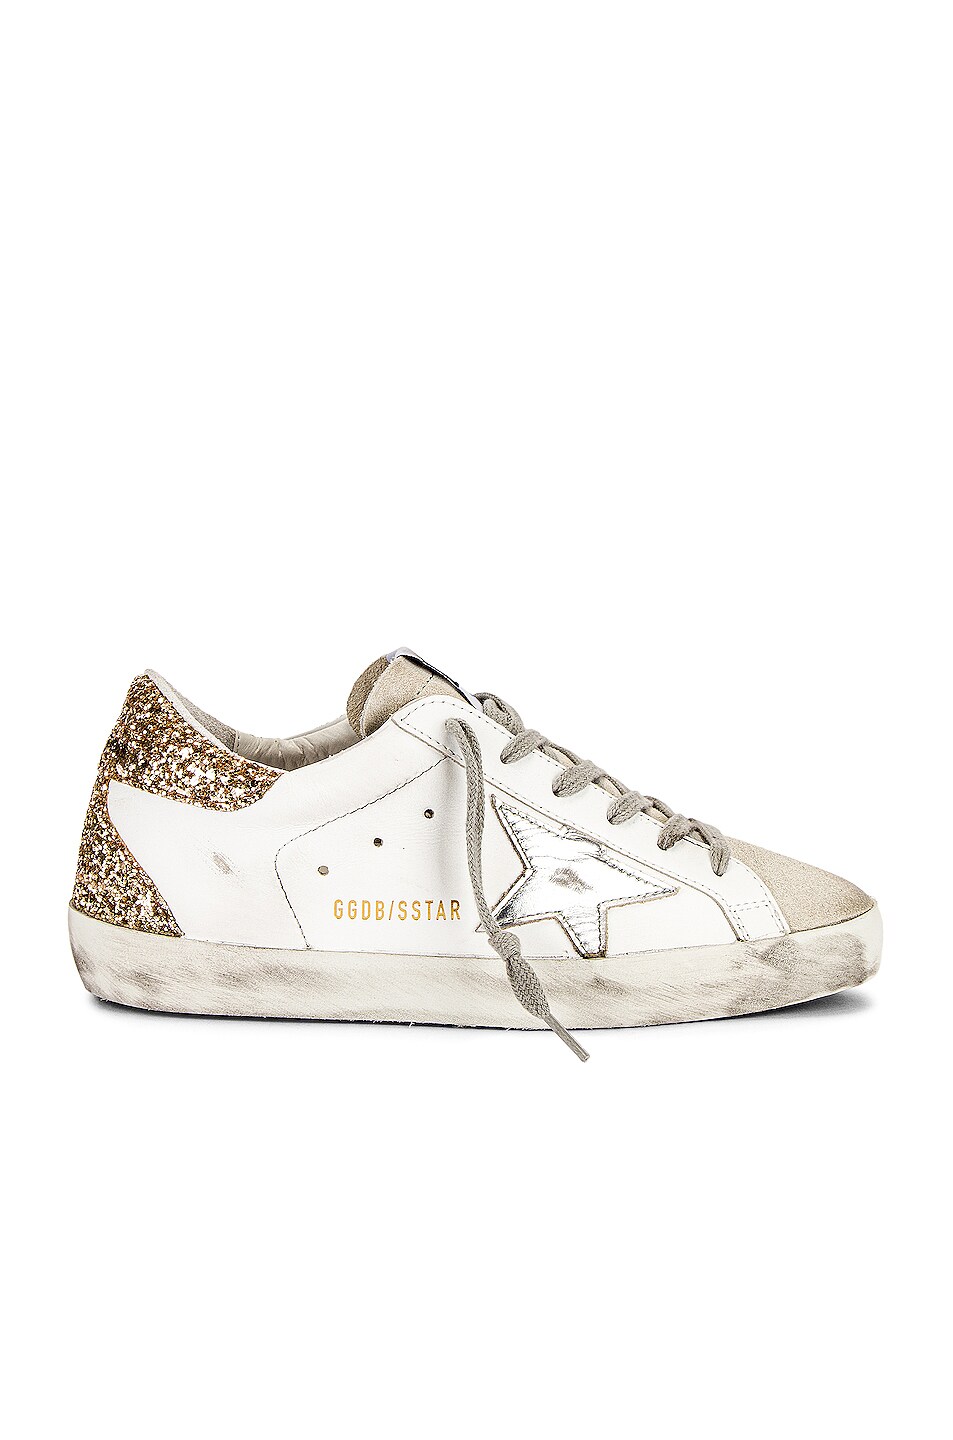 Image 1 of Golden Goose Superstar Sneaker in White, Ice, Silver & Gold